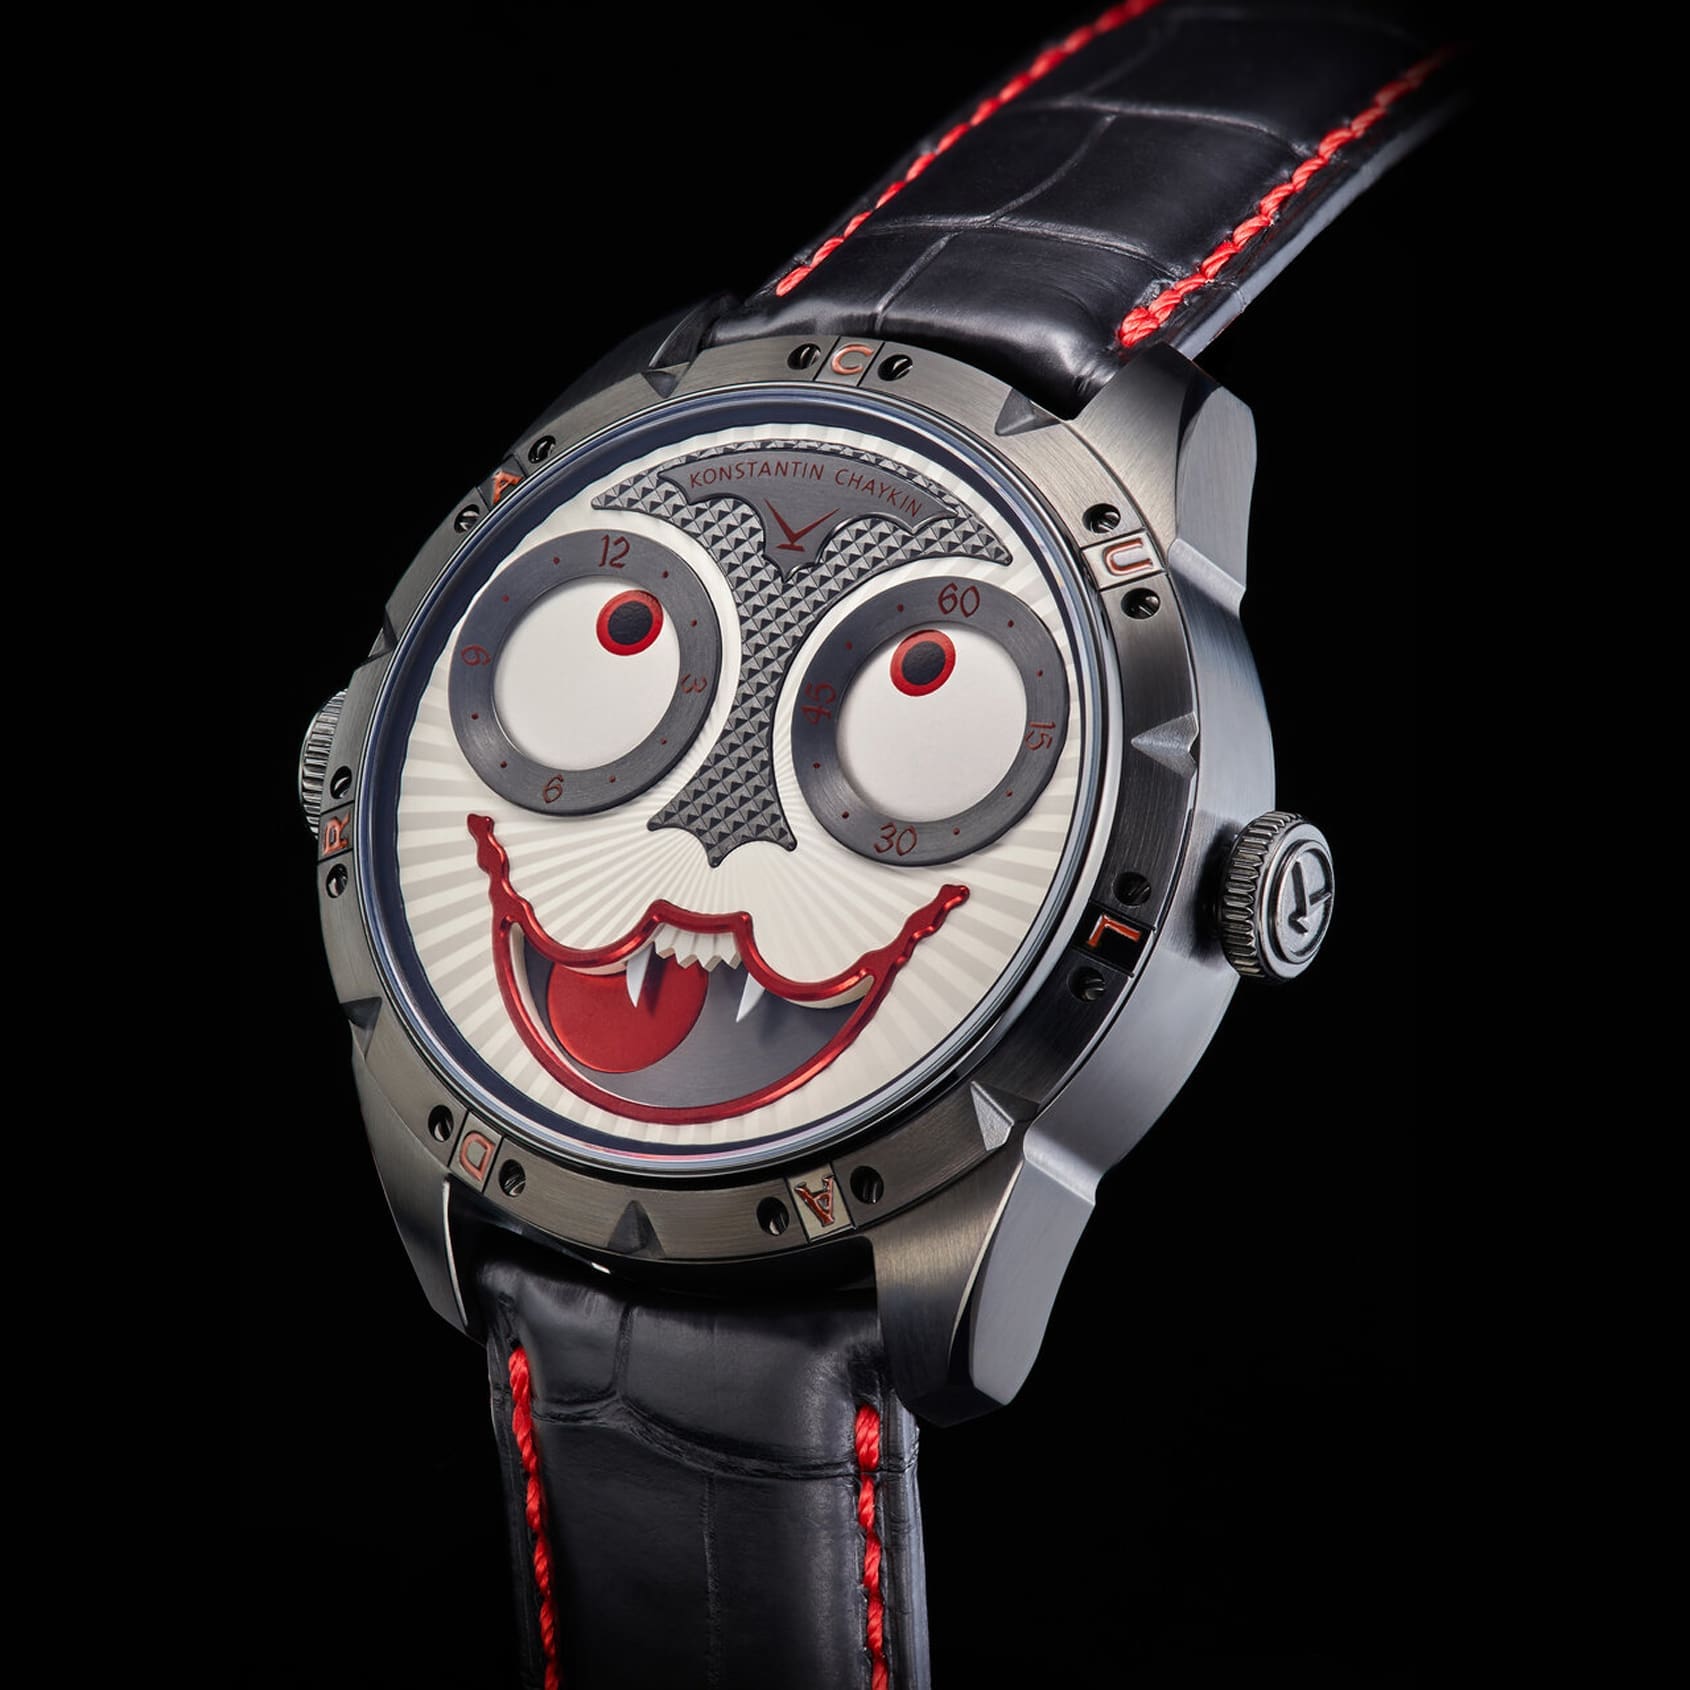 evil looking watches